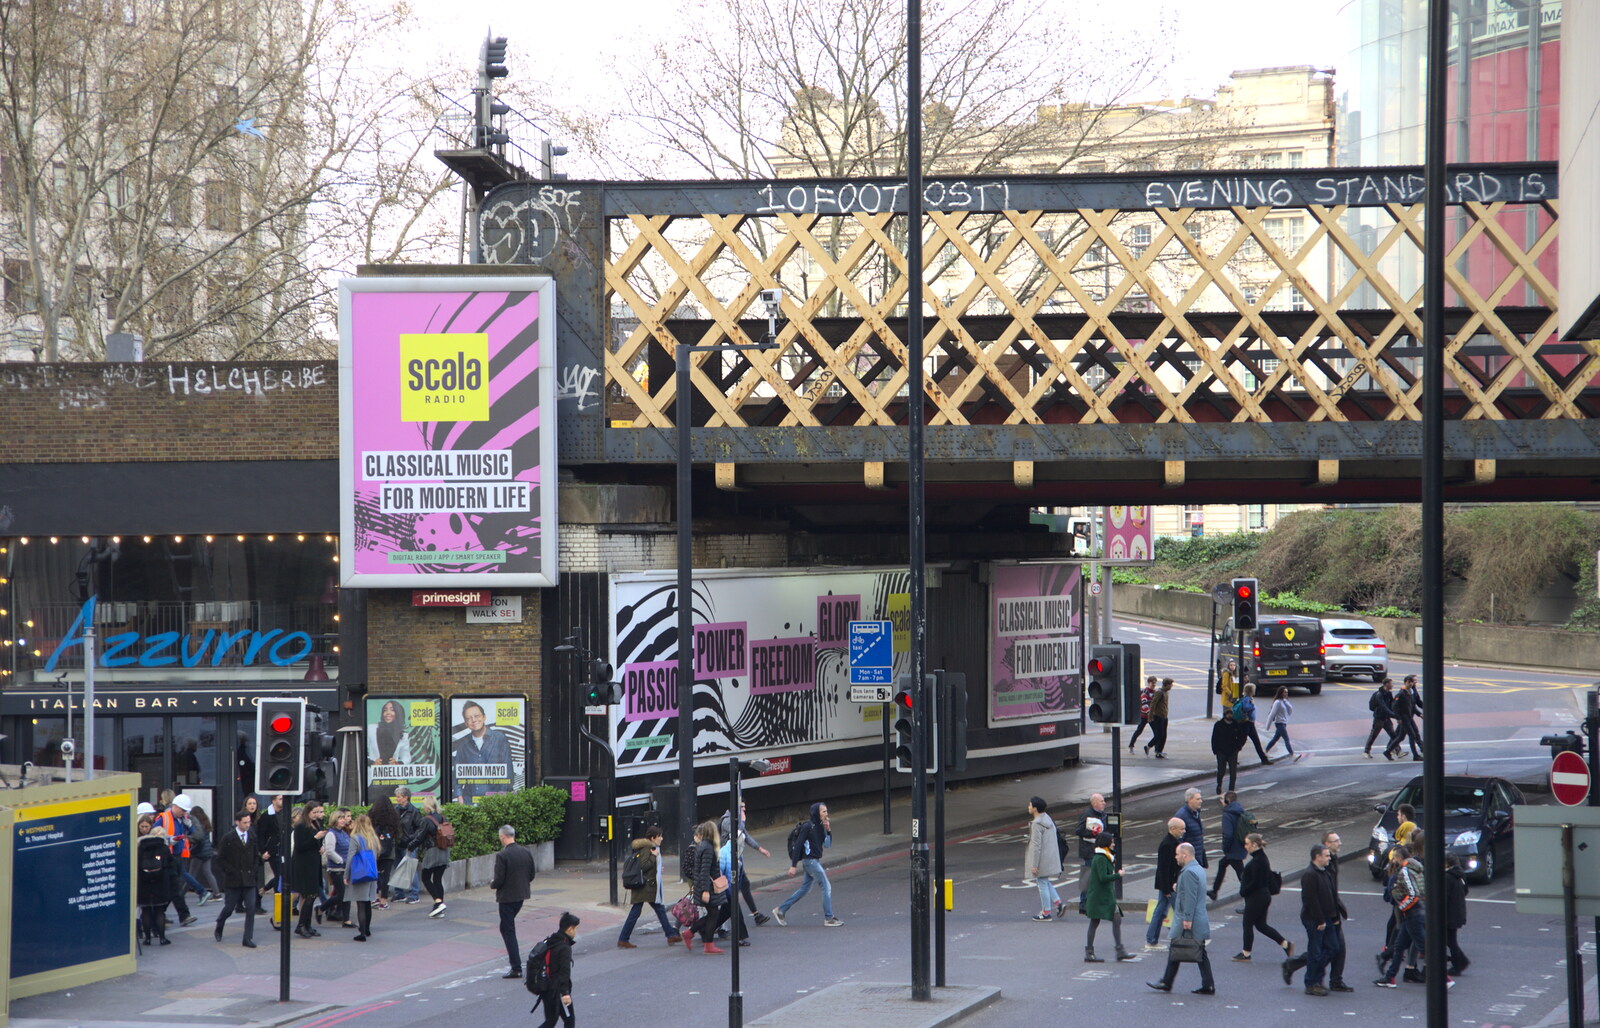 Cast-iron railway bridge, and 10Foot graffiti from A Team Outing at Namco Funscape, South Bank, London - 27th March 2019